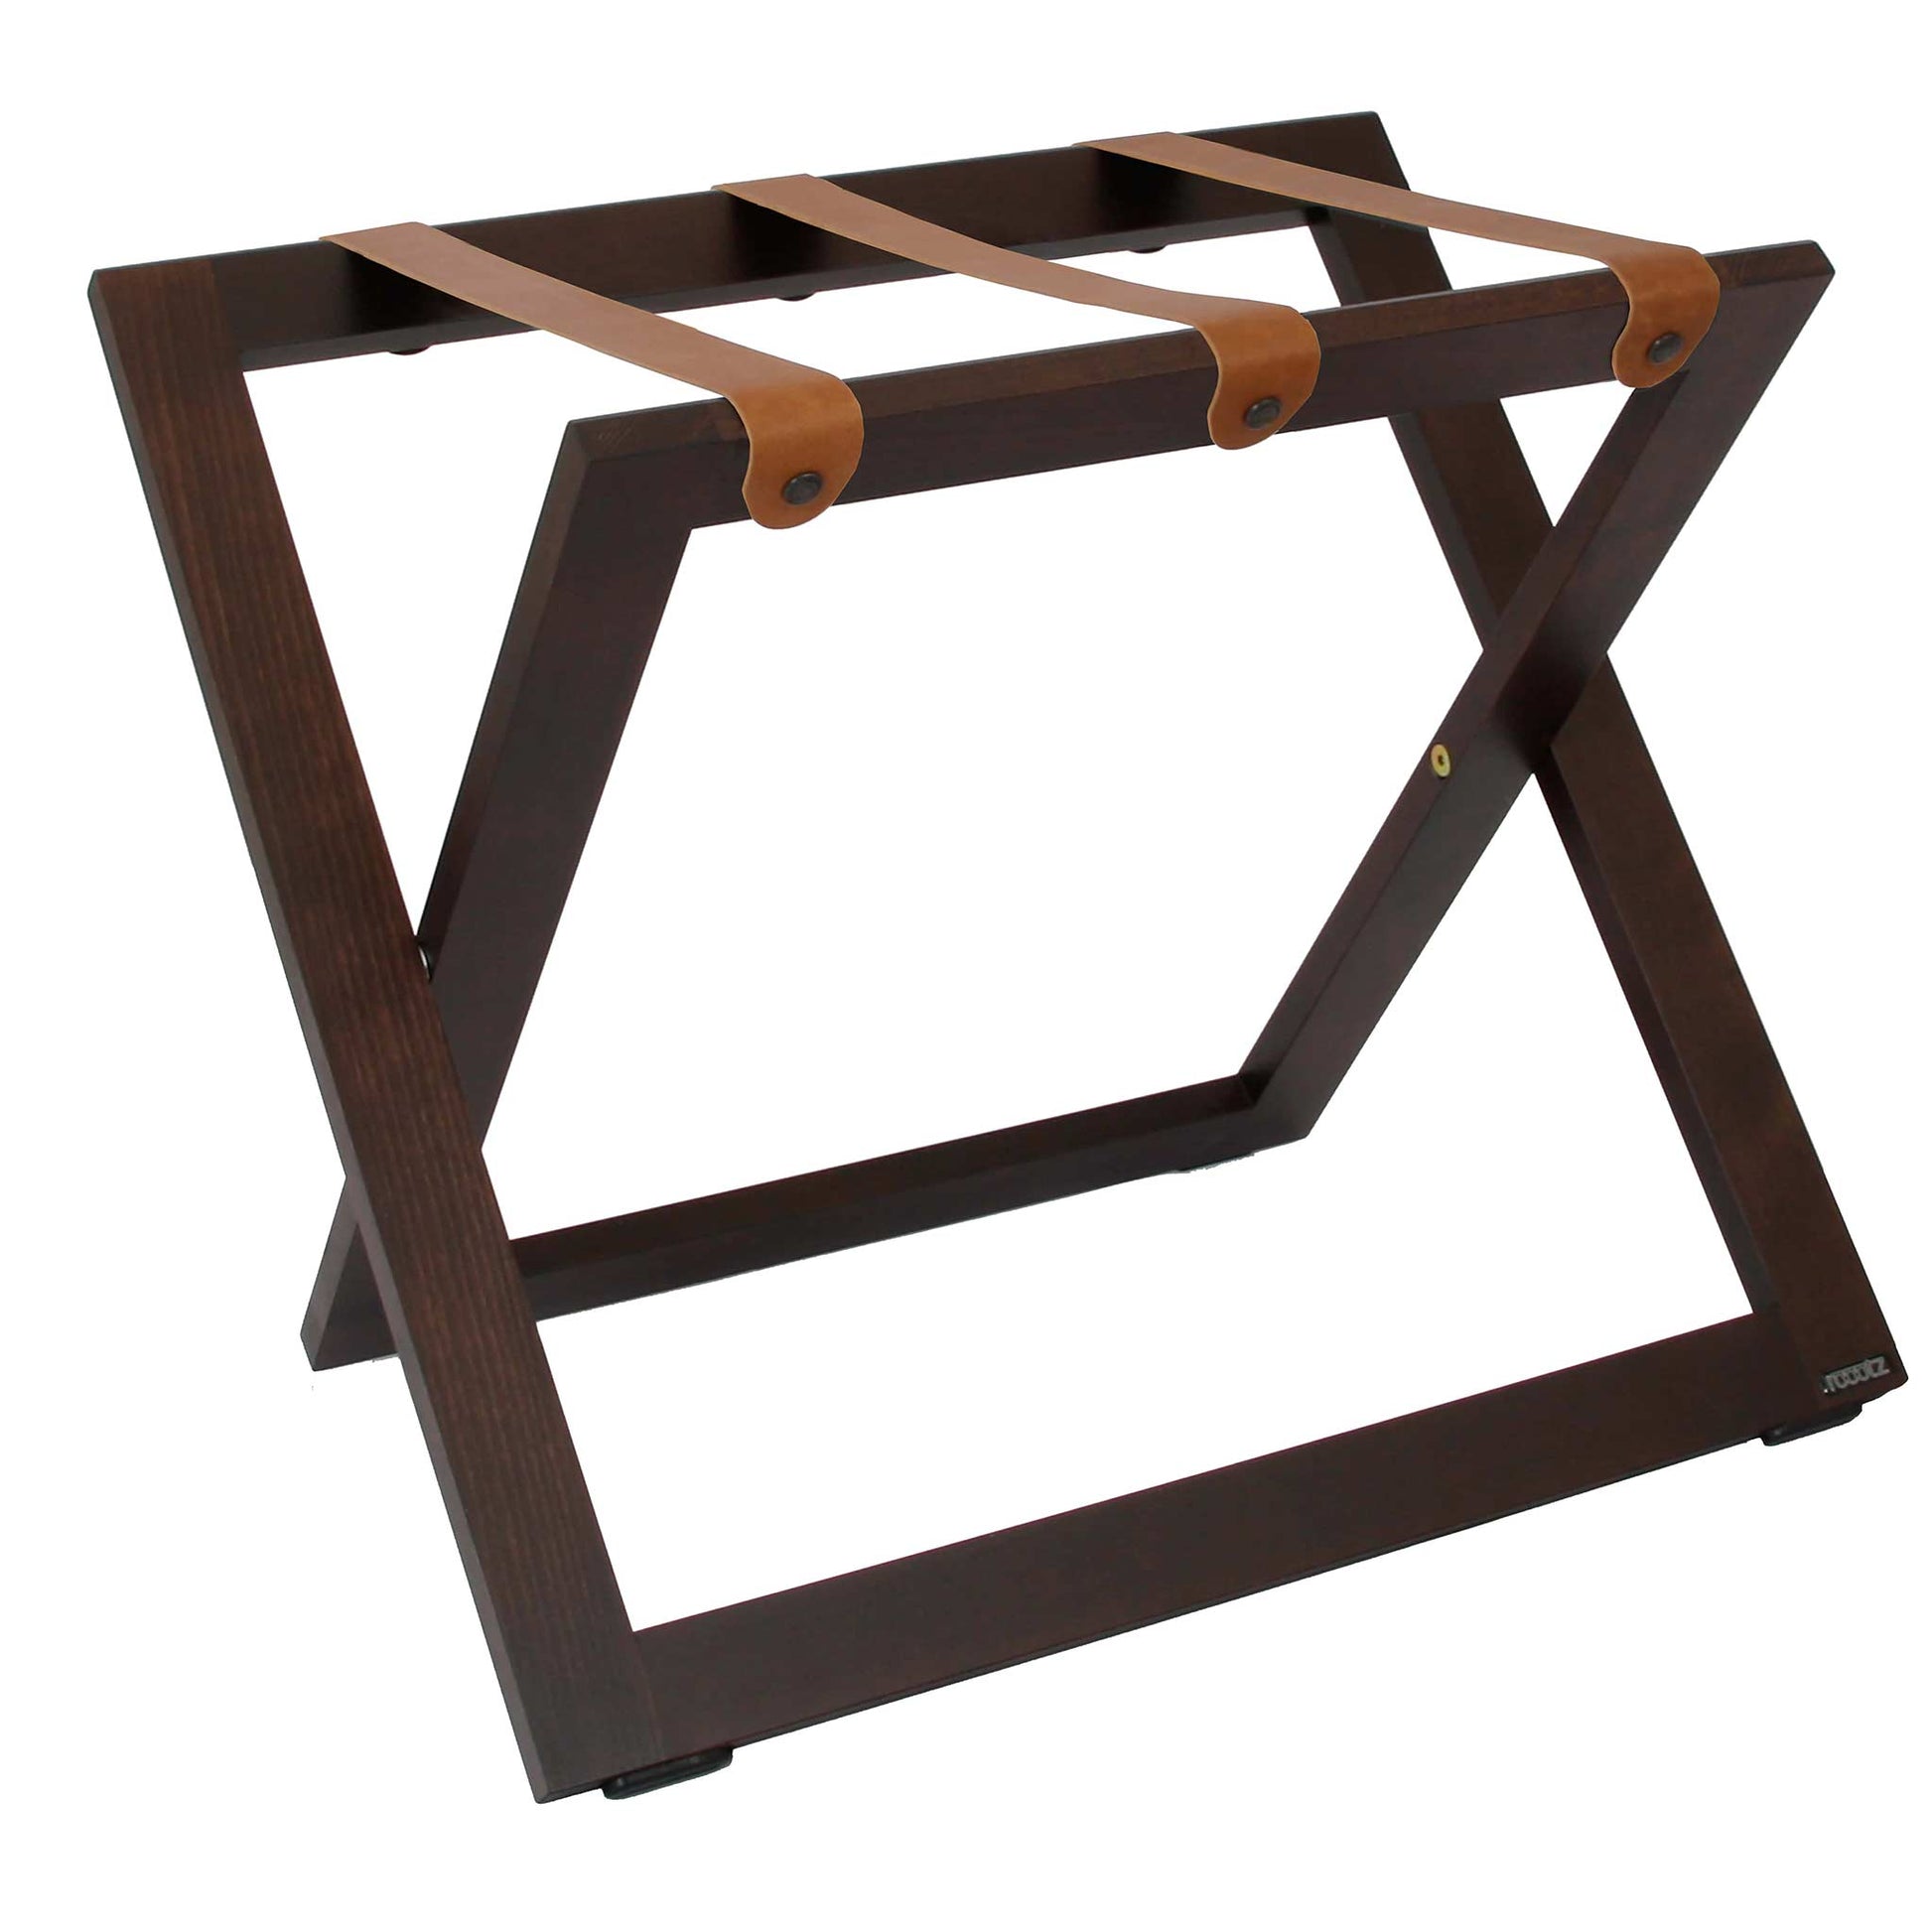 Roootz compact walnut wooden hotel luggage rack with brown leather straps